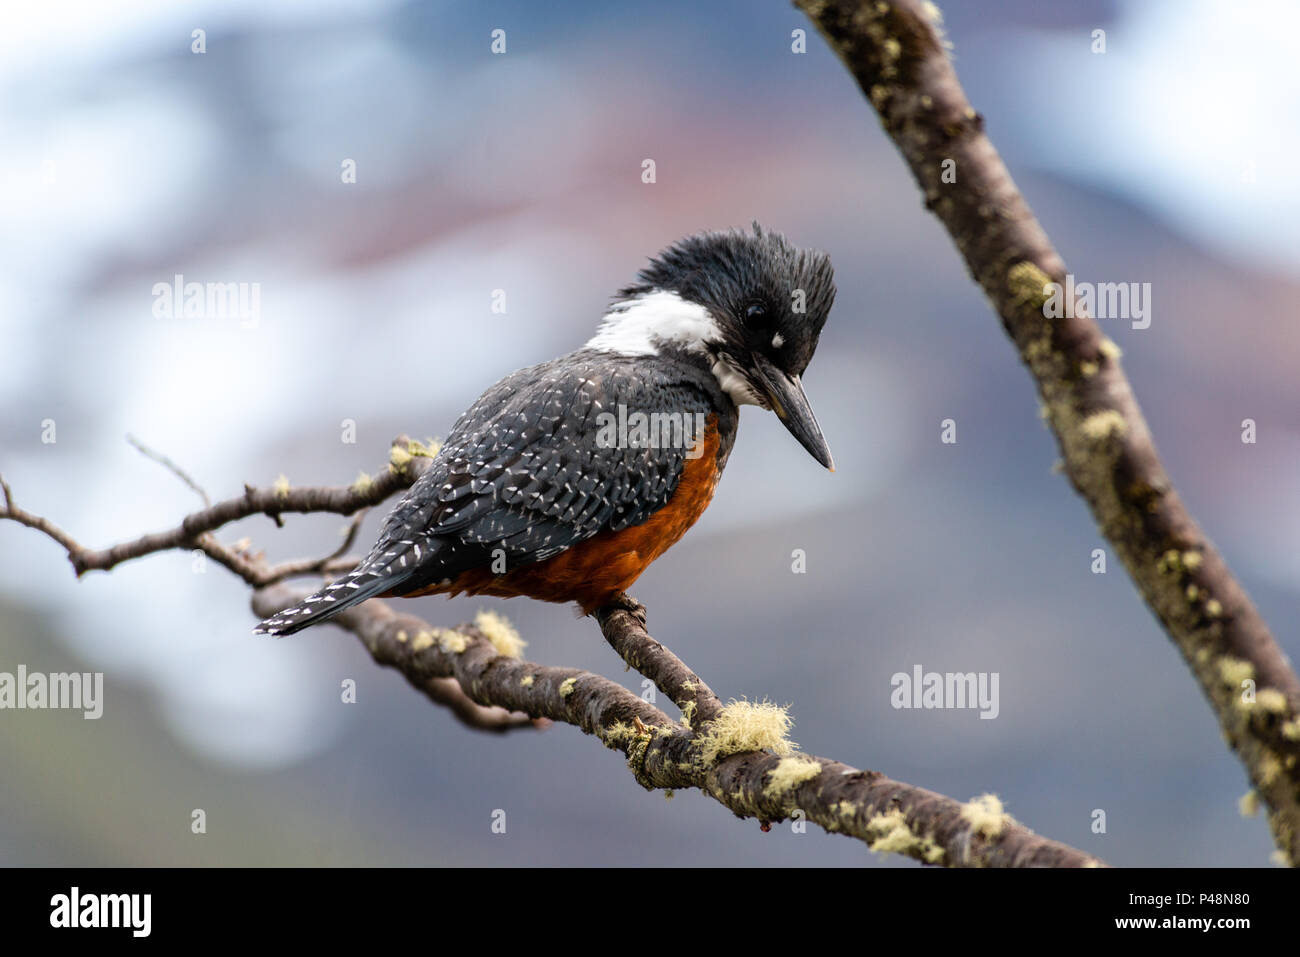 The ringed kingfisher (Megaceryle torquata) is a large, conspicuous and noisy kingfisher commonly found along the lower Rio Grande valley in southeast Stock Photo